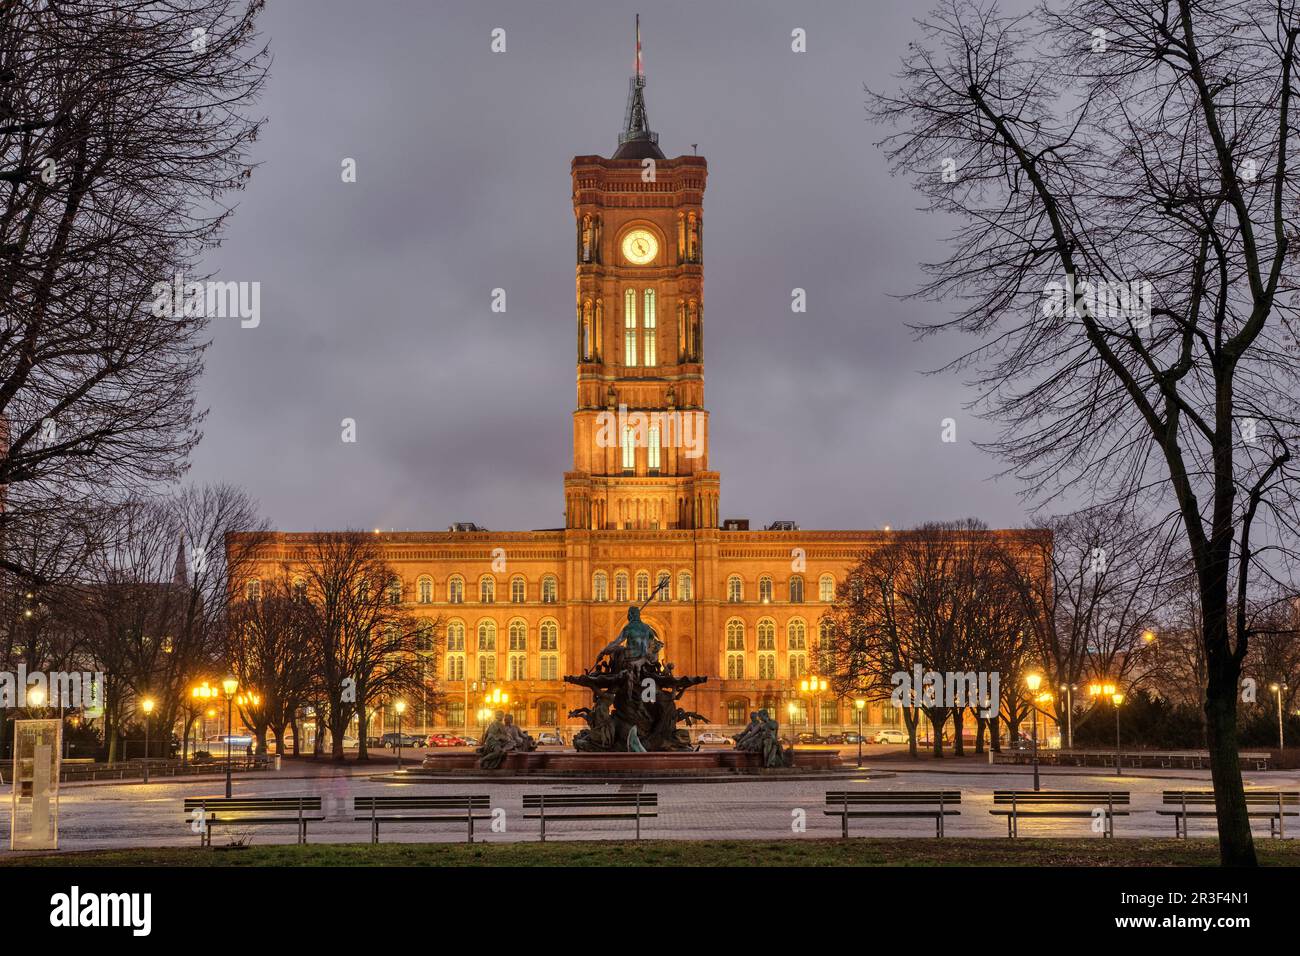 The famous Rotes Rathaus in Berlin at night in winter witrh some barren tree branches Stock Photo